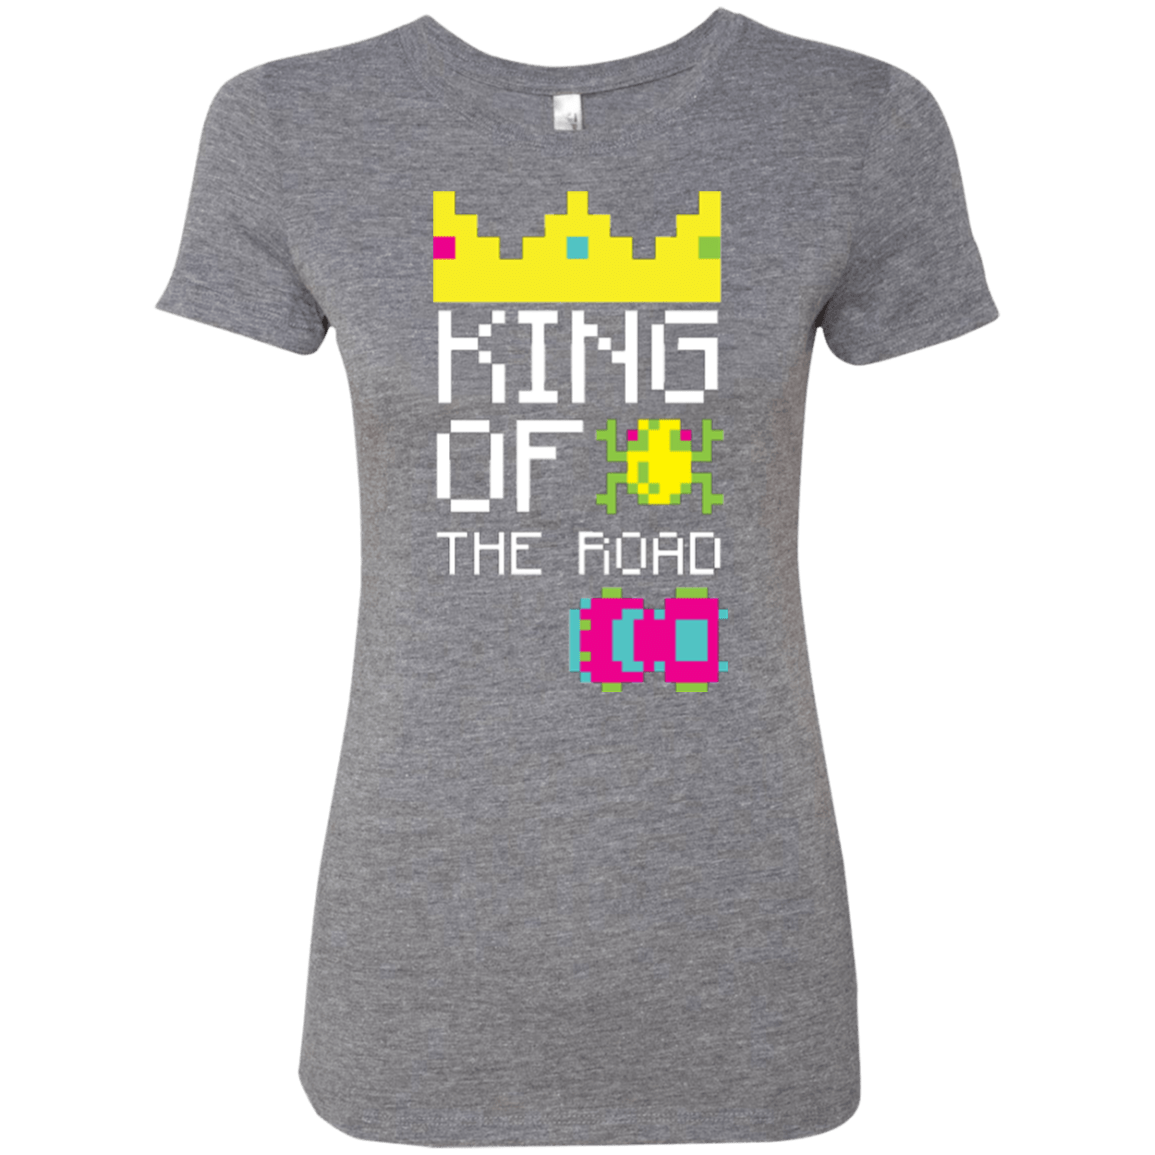 T-Shirts Premium Heather / Small King Of The Road Women's Triblend T-Shirt